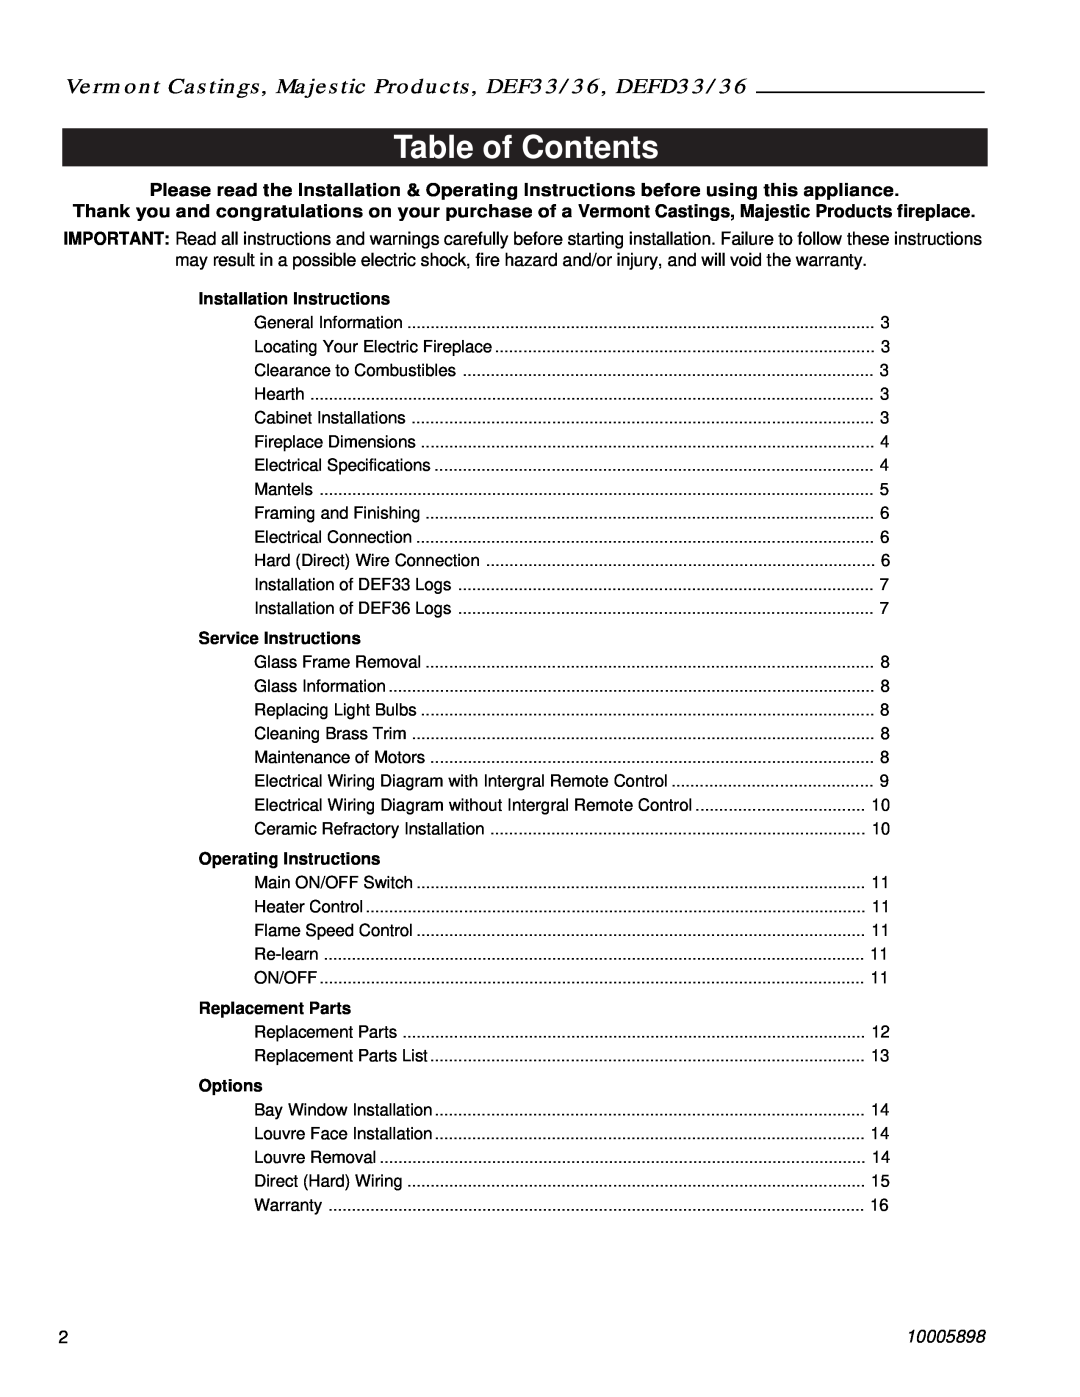 Vermont Casting DEFD36 Table of Contents, Installation Instructions, Service Instructions, Operating Instructions, Options 